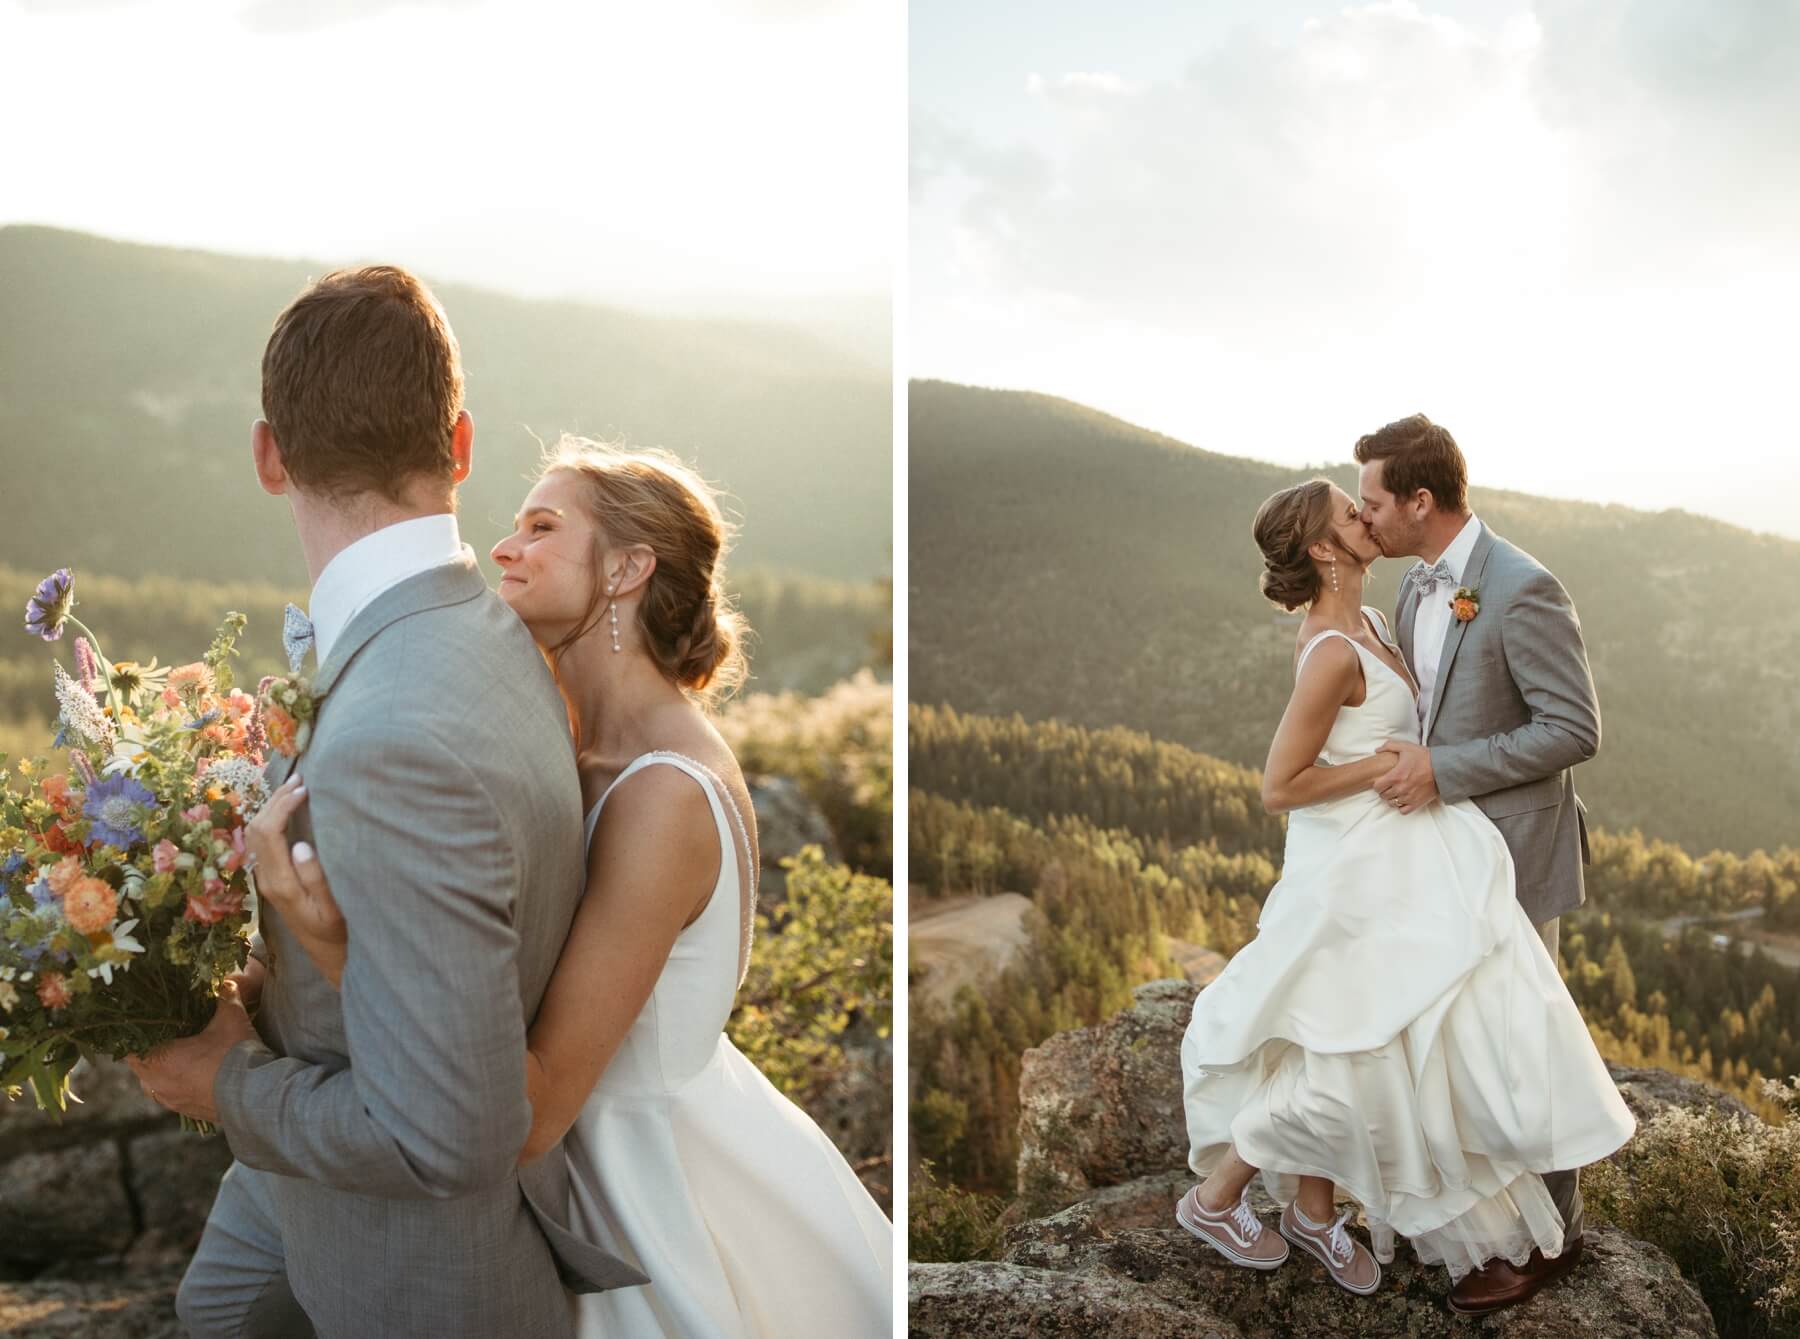 Bride standing behind groom as he holds her bouquet | bride and groom kissing during golden hour photos with bride wearing sneakers